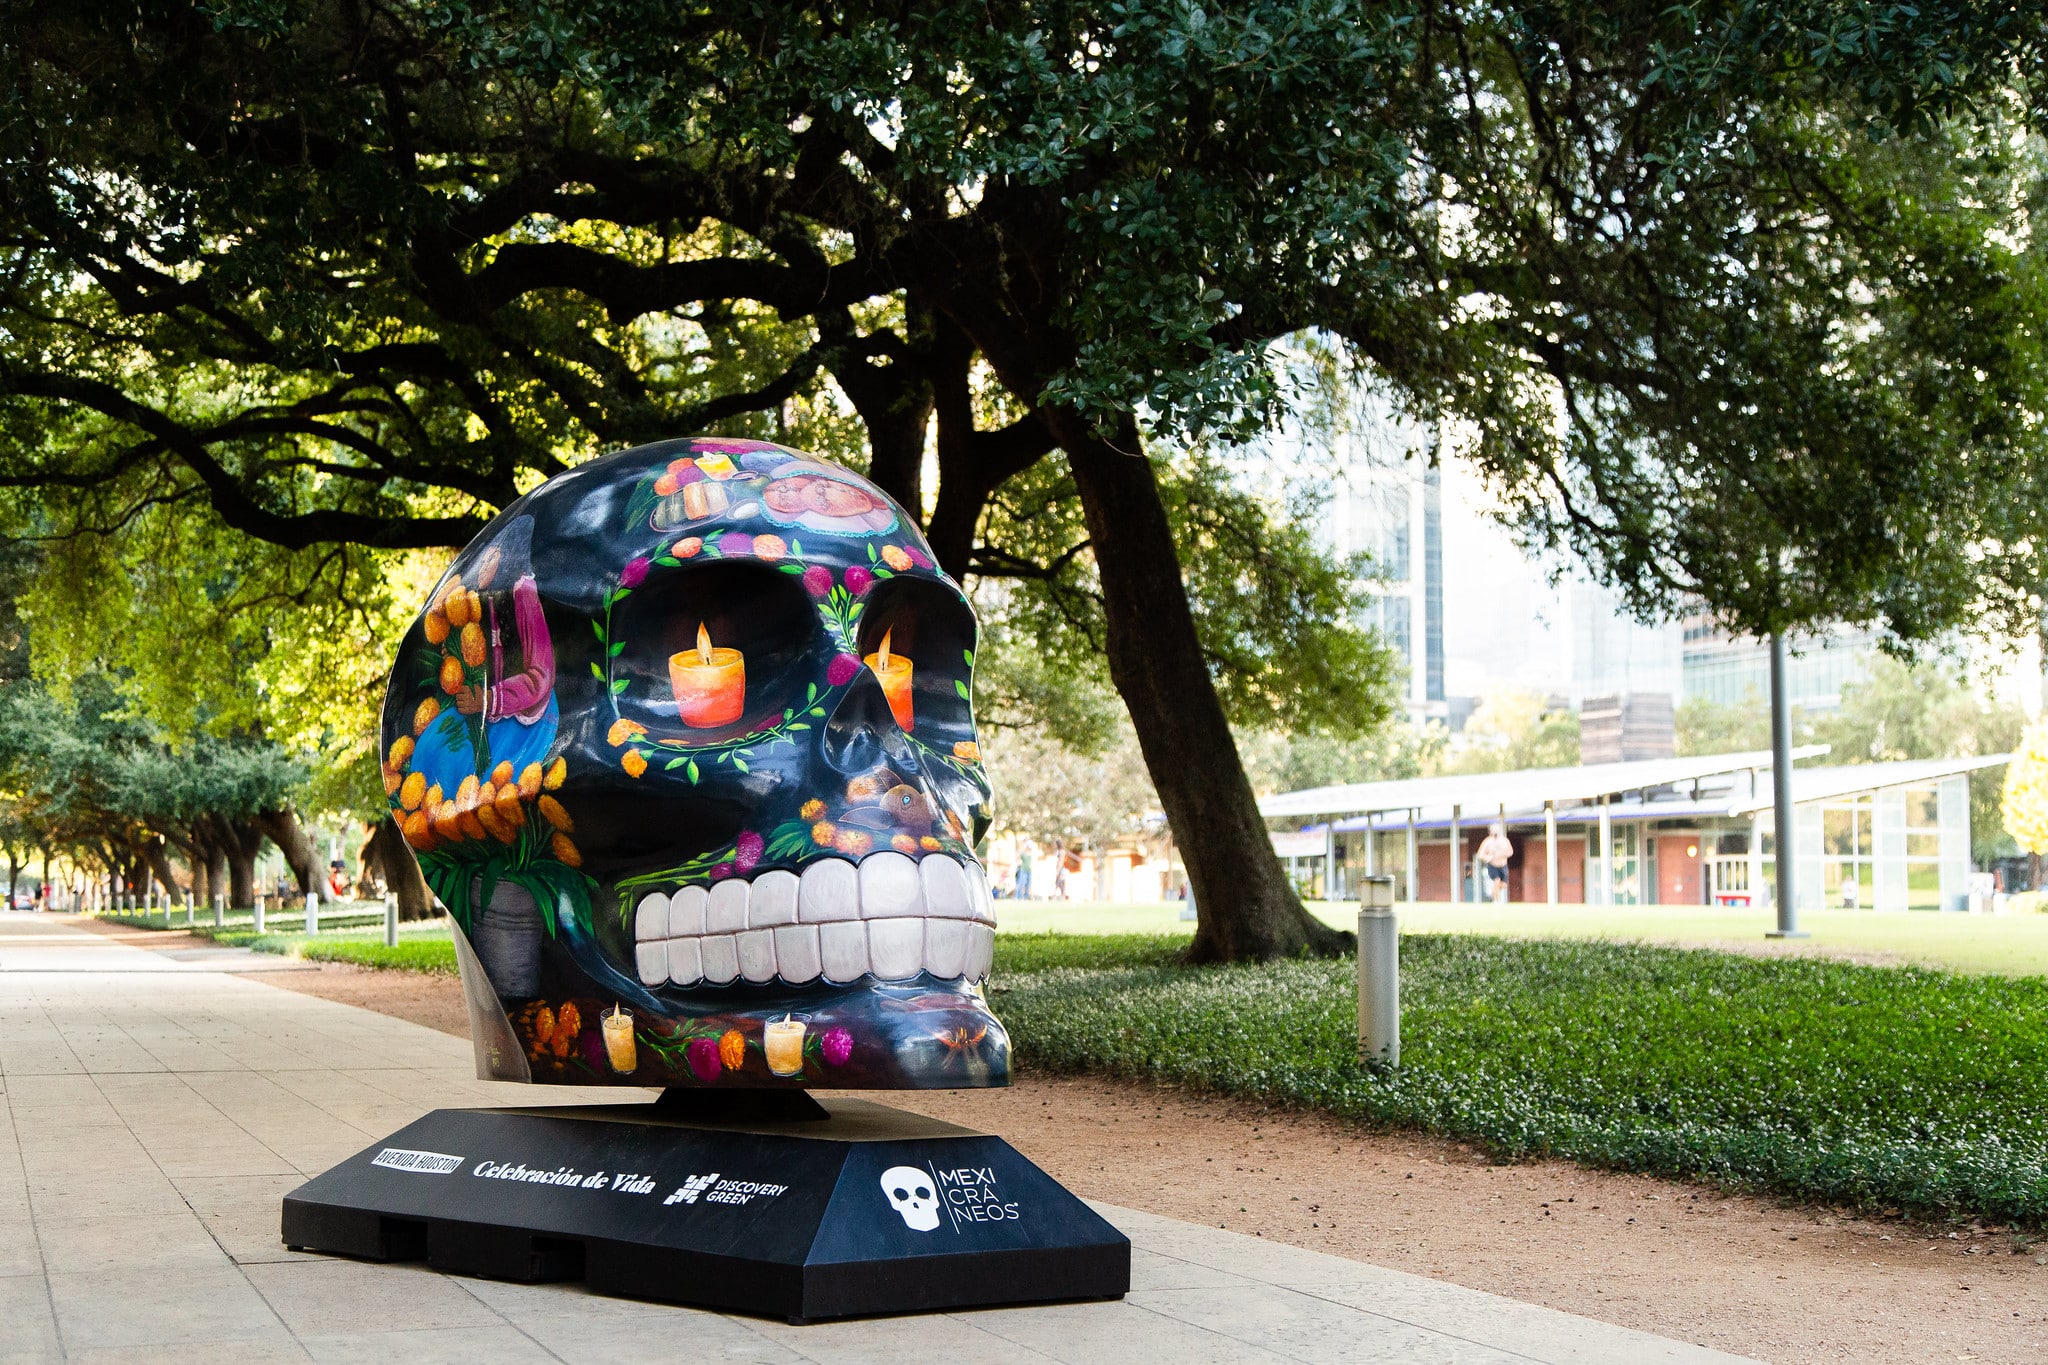 vibrantly colored skulls on display at Discovery Green